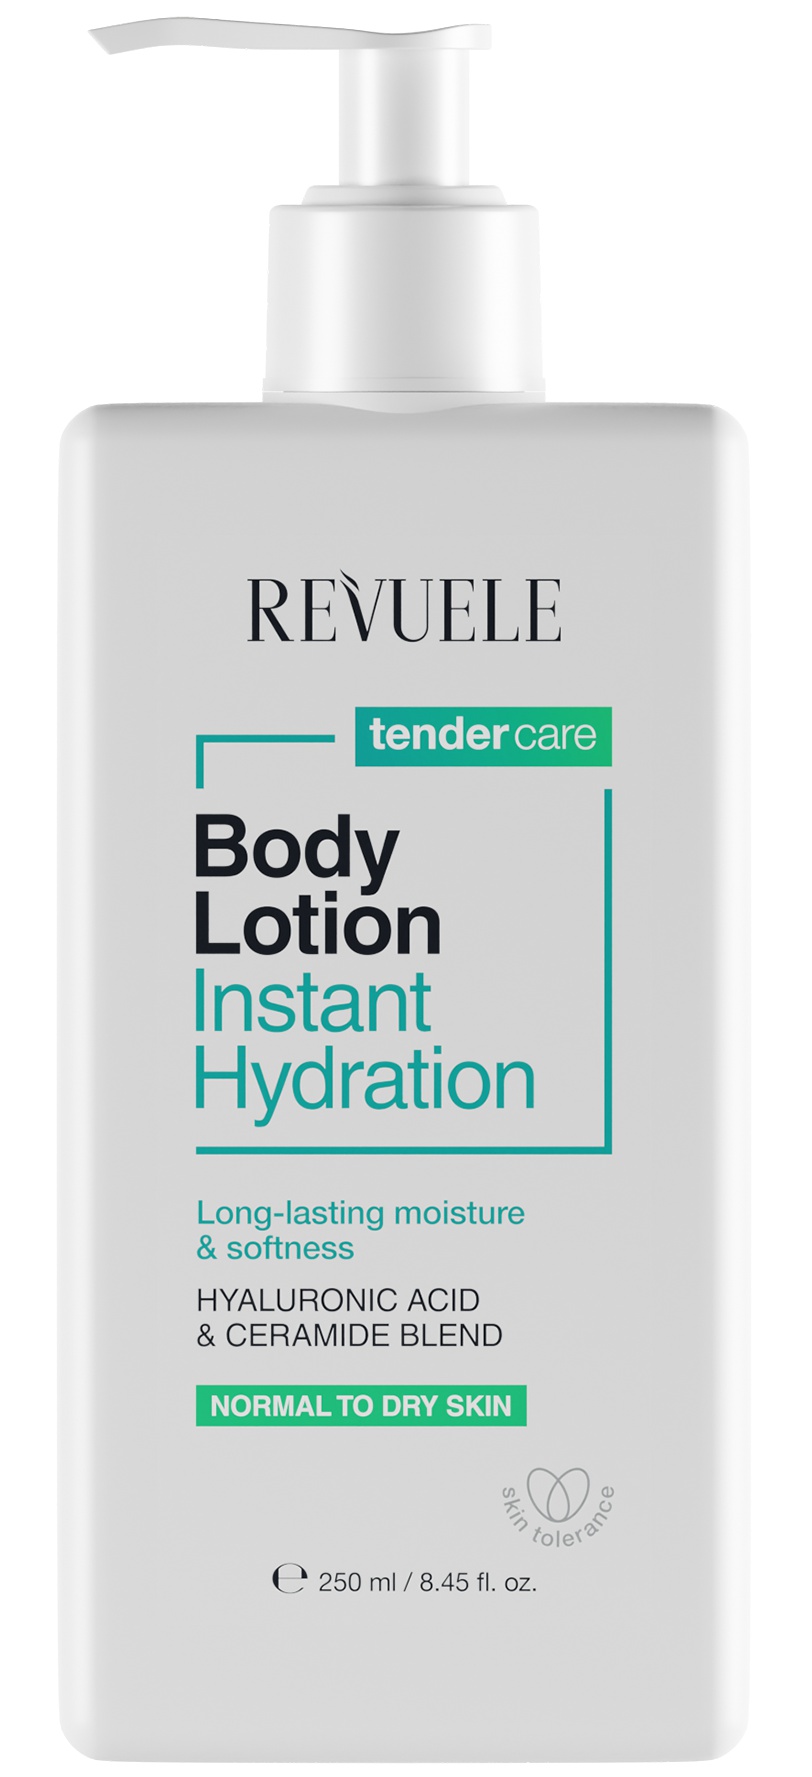 Revuele Tender Care Body Lotion Instant Hydration